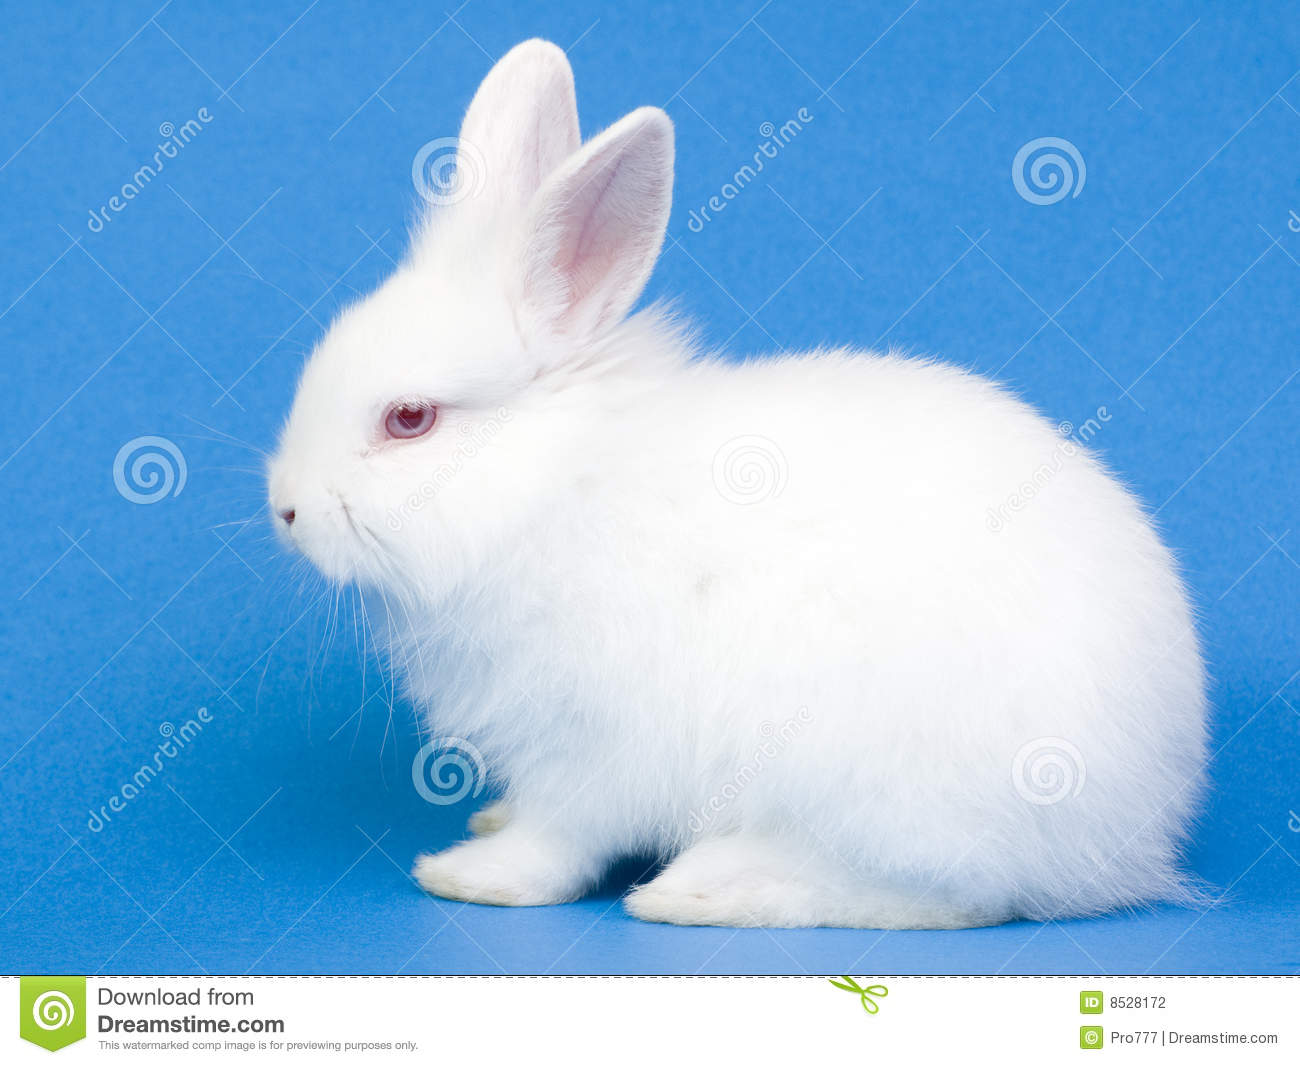 Free download Cute White Baby Rabbits